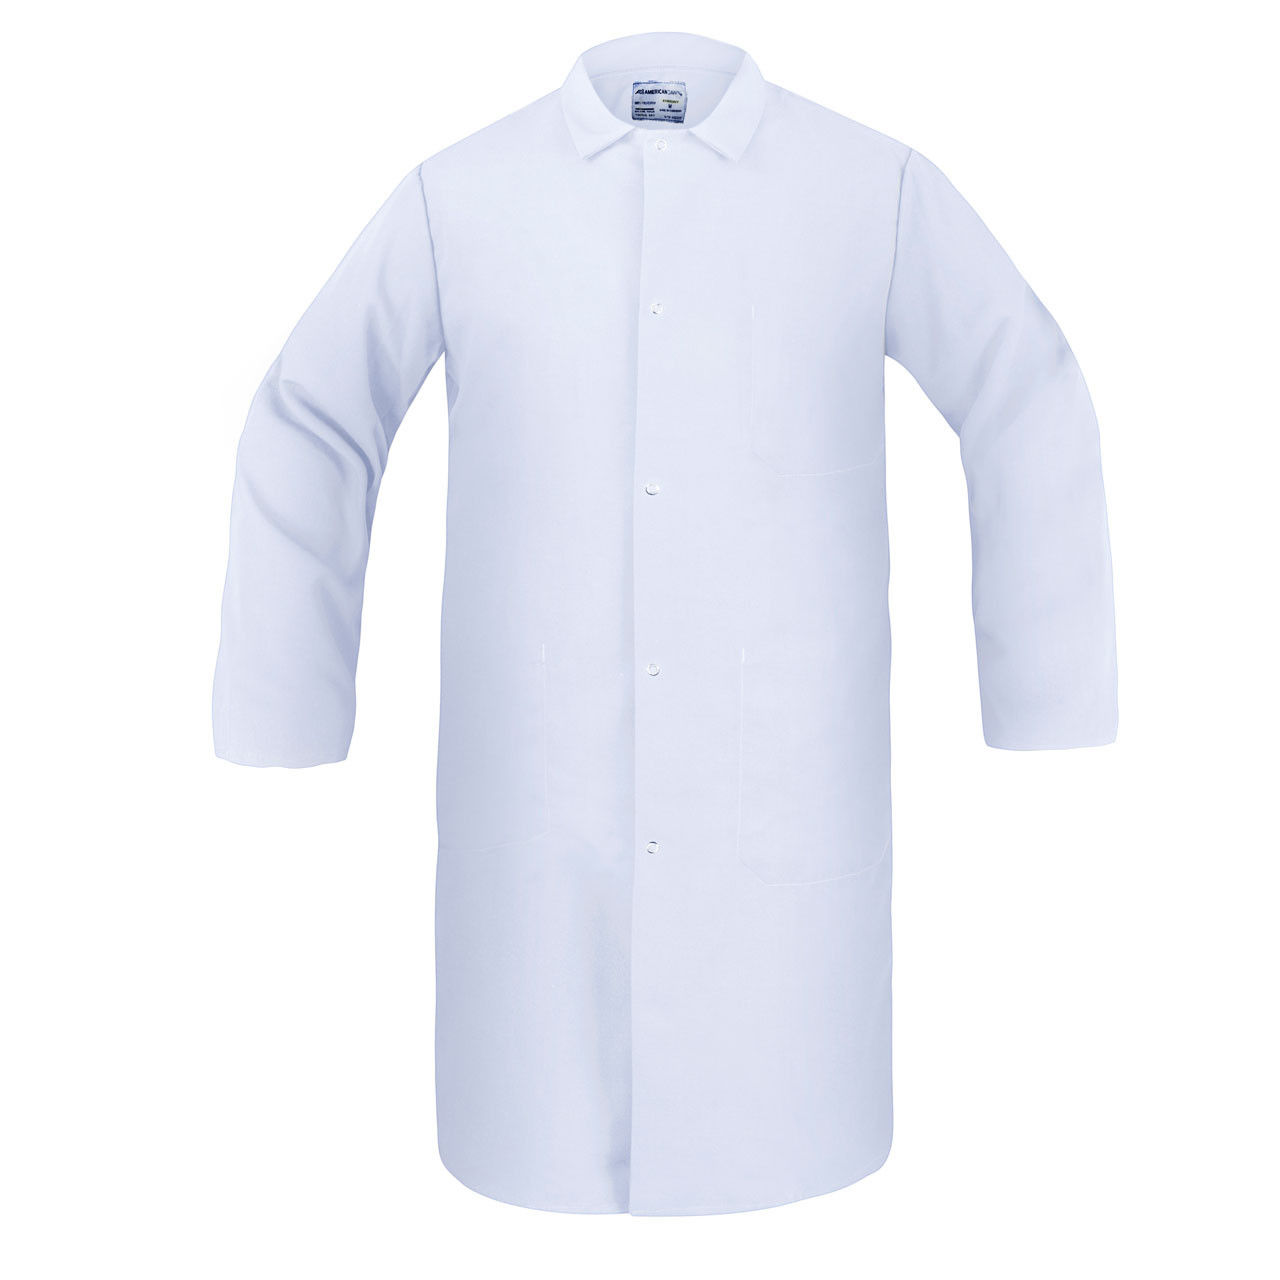 Does the butcher frock in white have a specific type of closure?